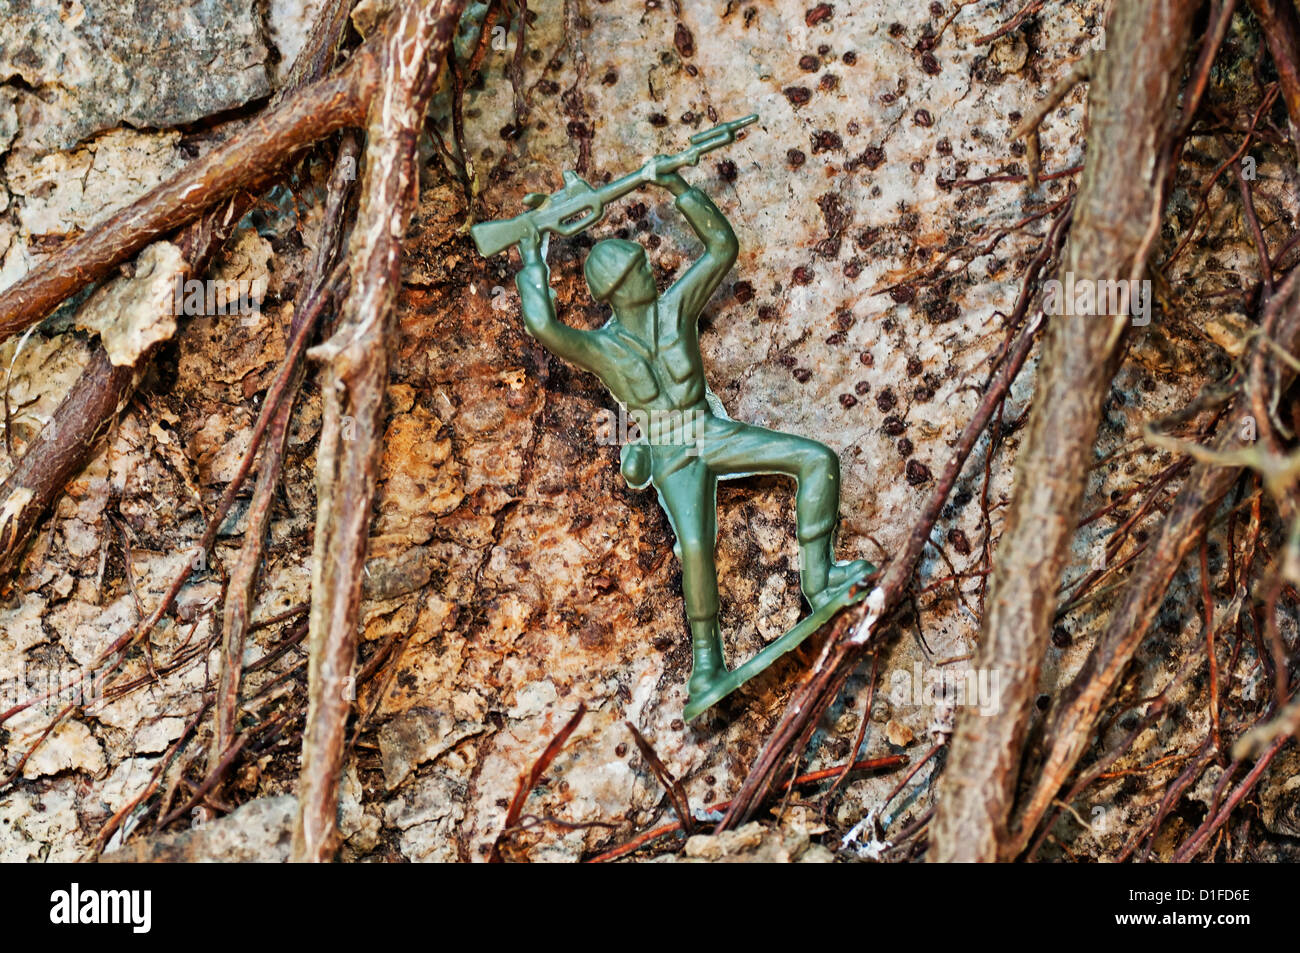 A green plastic toy soldier holds his rifle overhead while climbing in a difficult location outdoors. Stock Photo